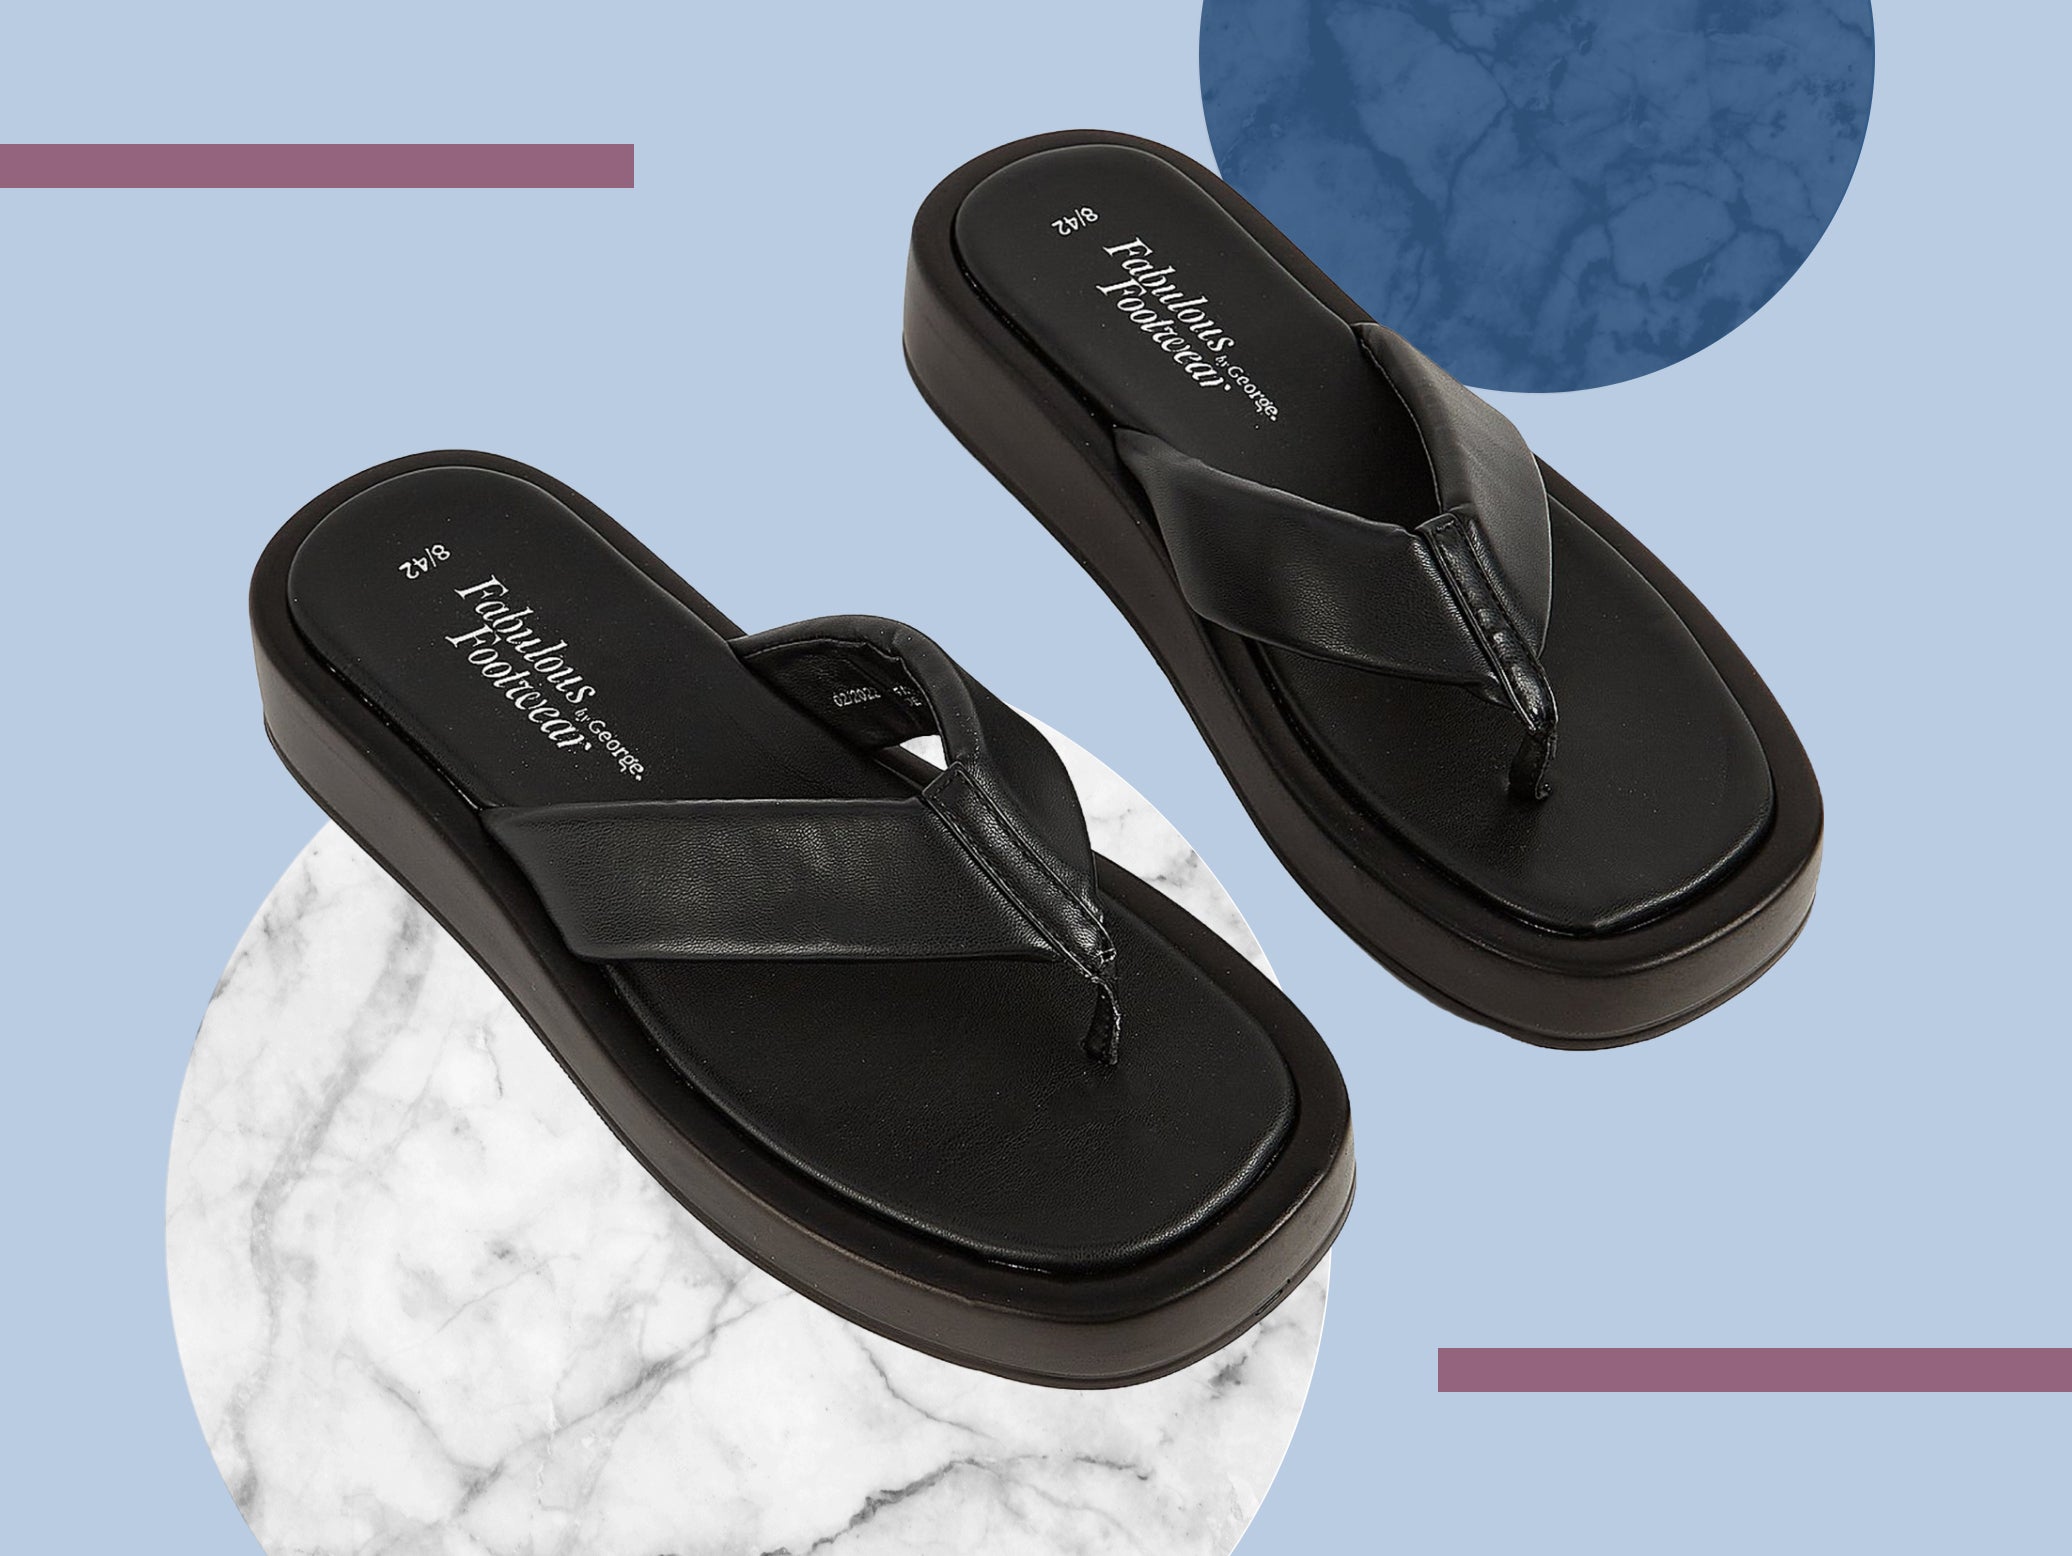 Whether you call them platform sandals or flatform flip flops, they’re here to stay for summer